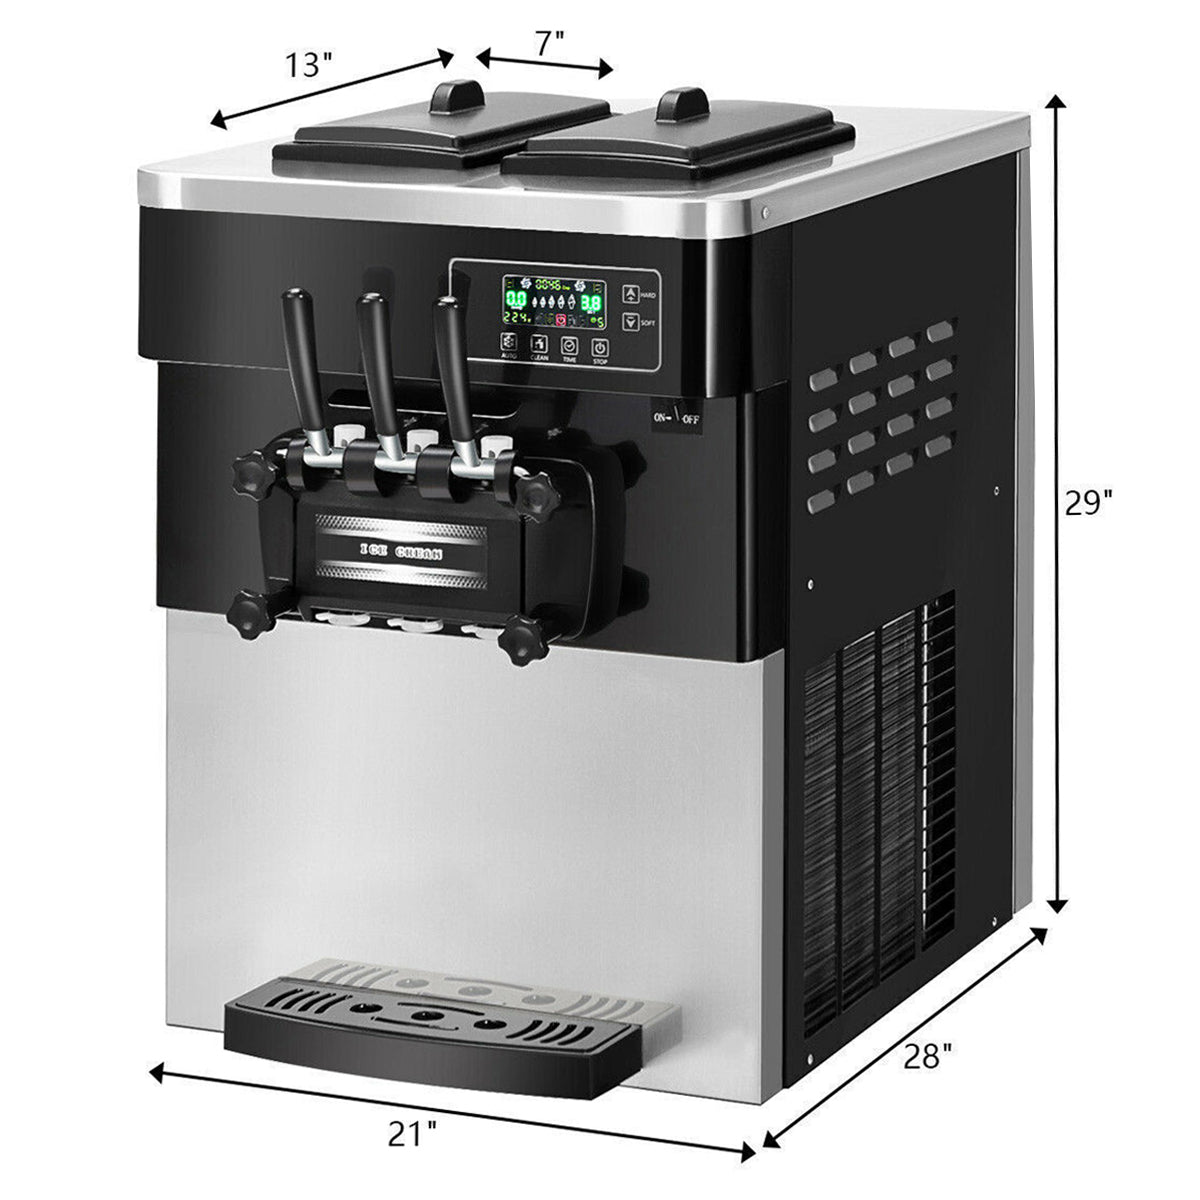 Large 20-28LH 3 Flavor Stainless Steel Commercial Ice Cream Machine W/ LCD Display, 2200W (93747150)